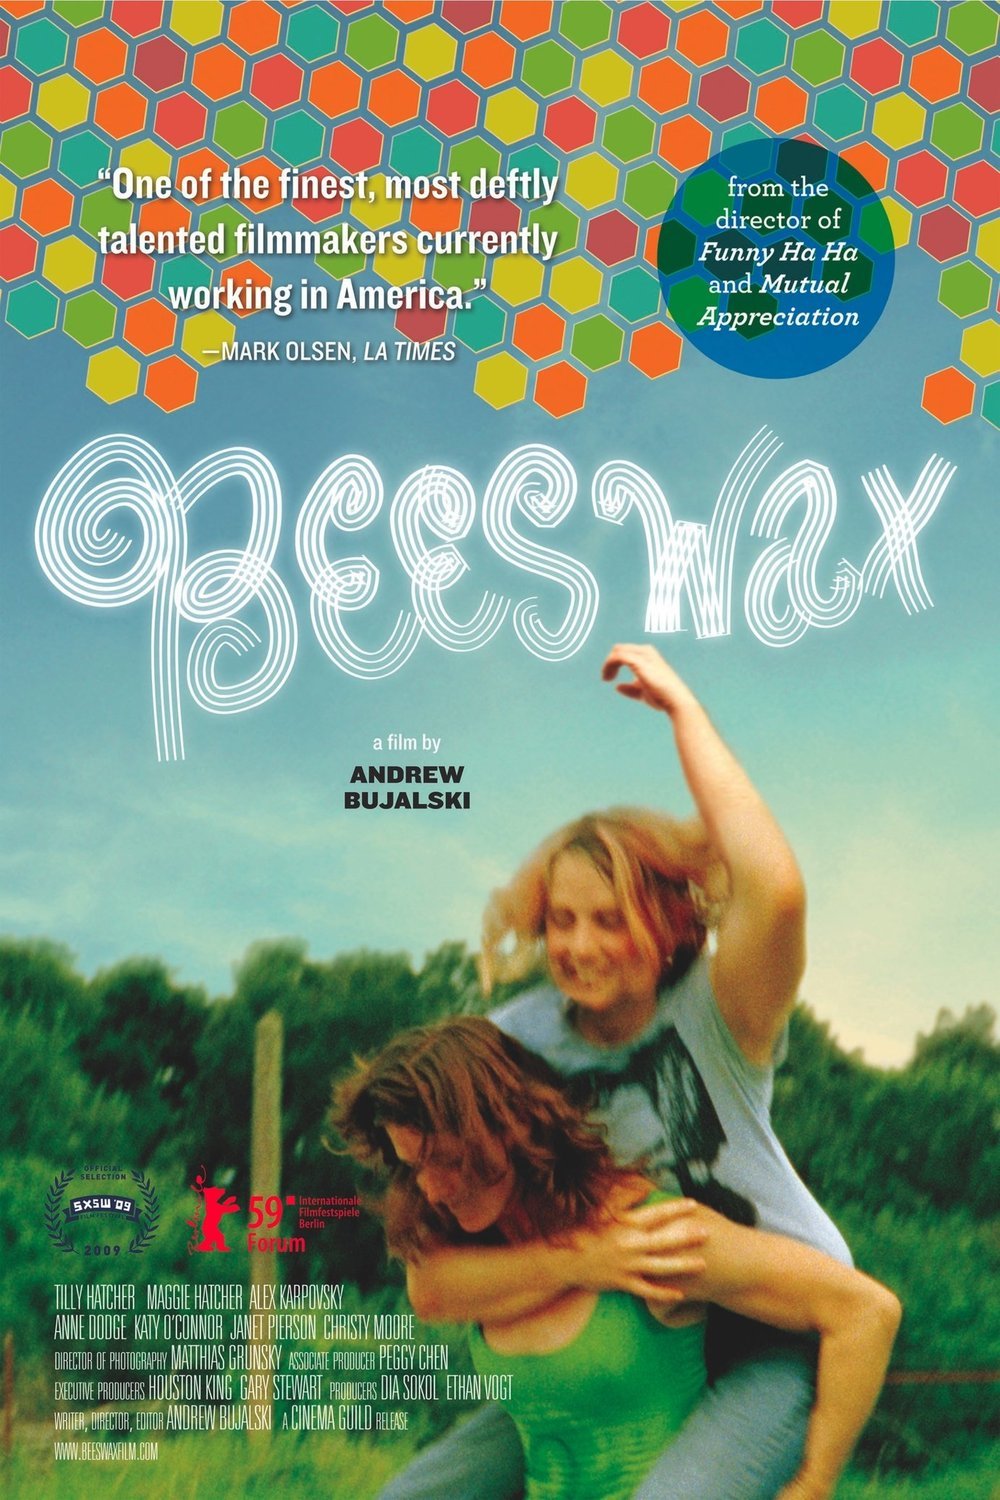 Poster of the movie Beeswax